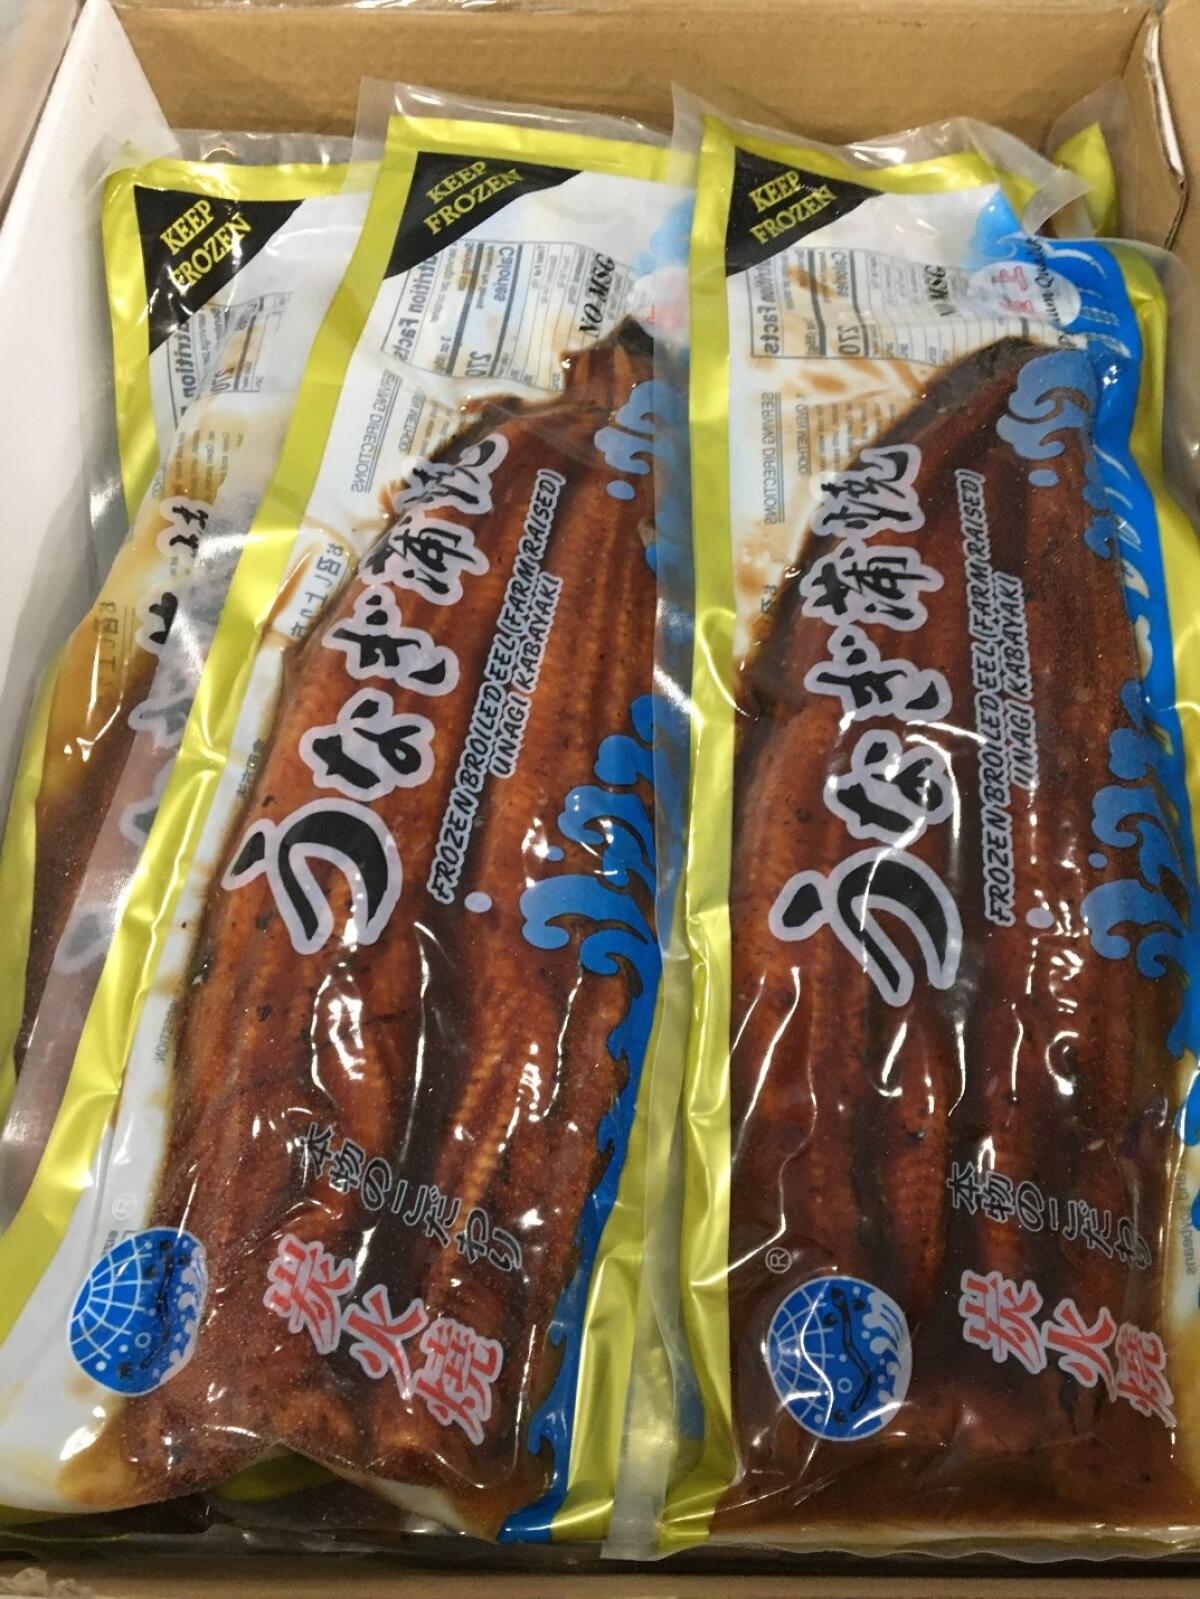 Frozen roasted eel packaged in a clear packaging with yellow borders.